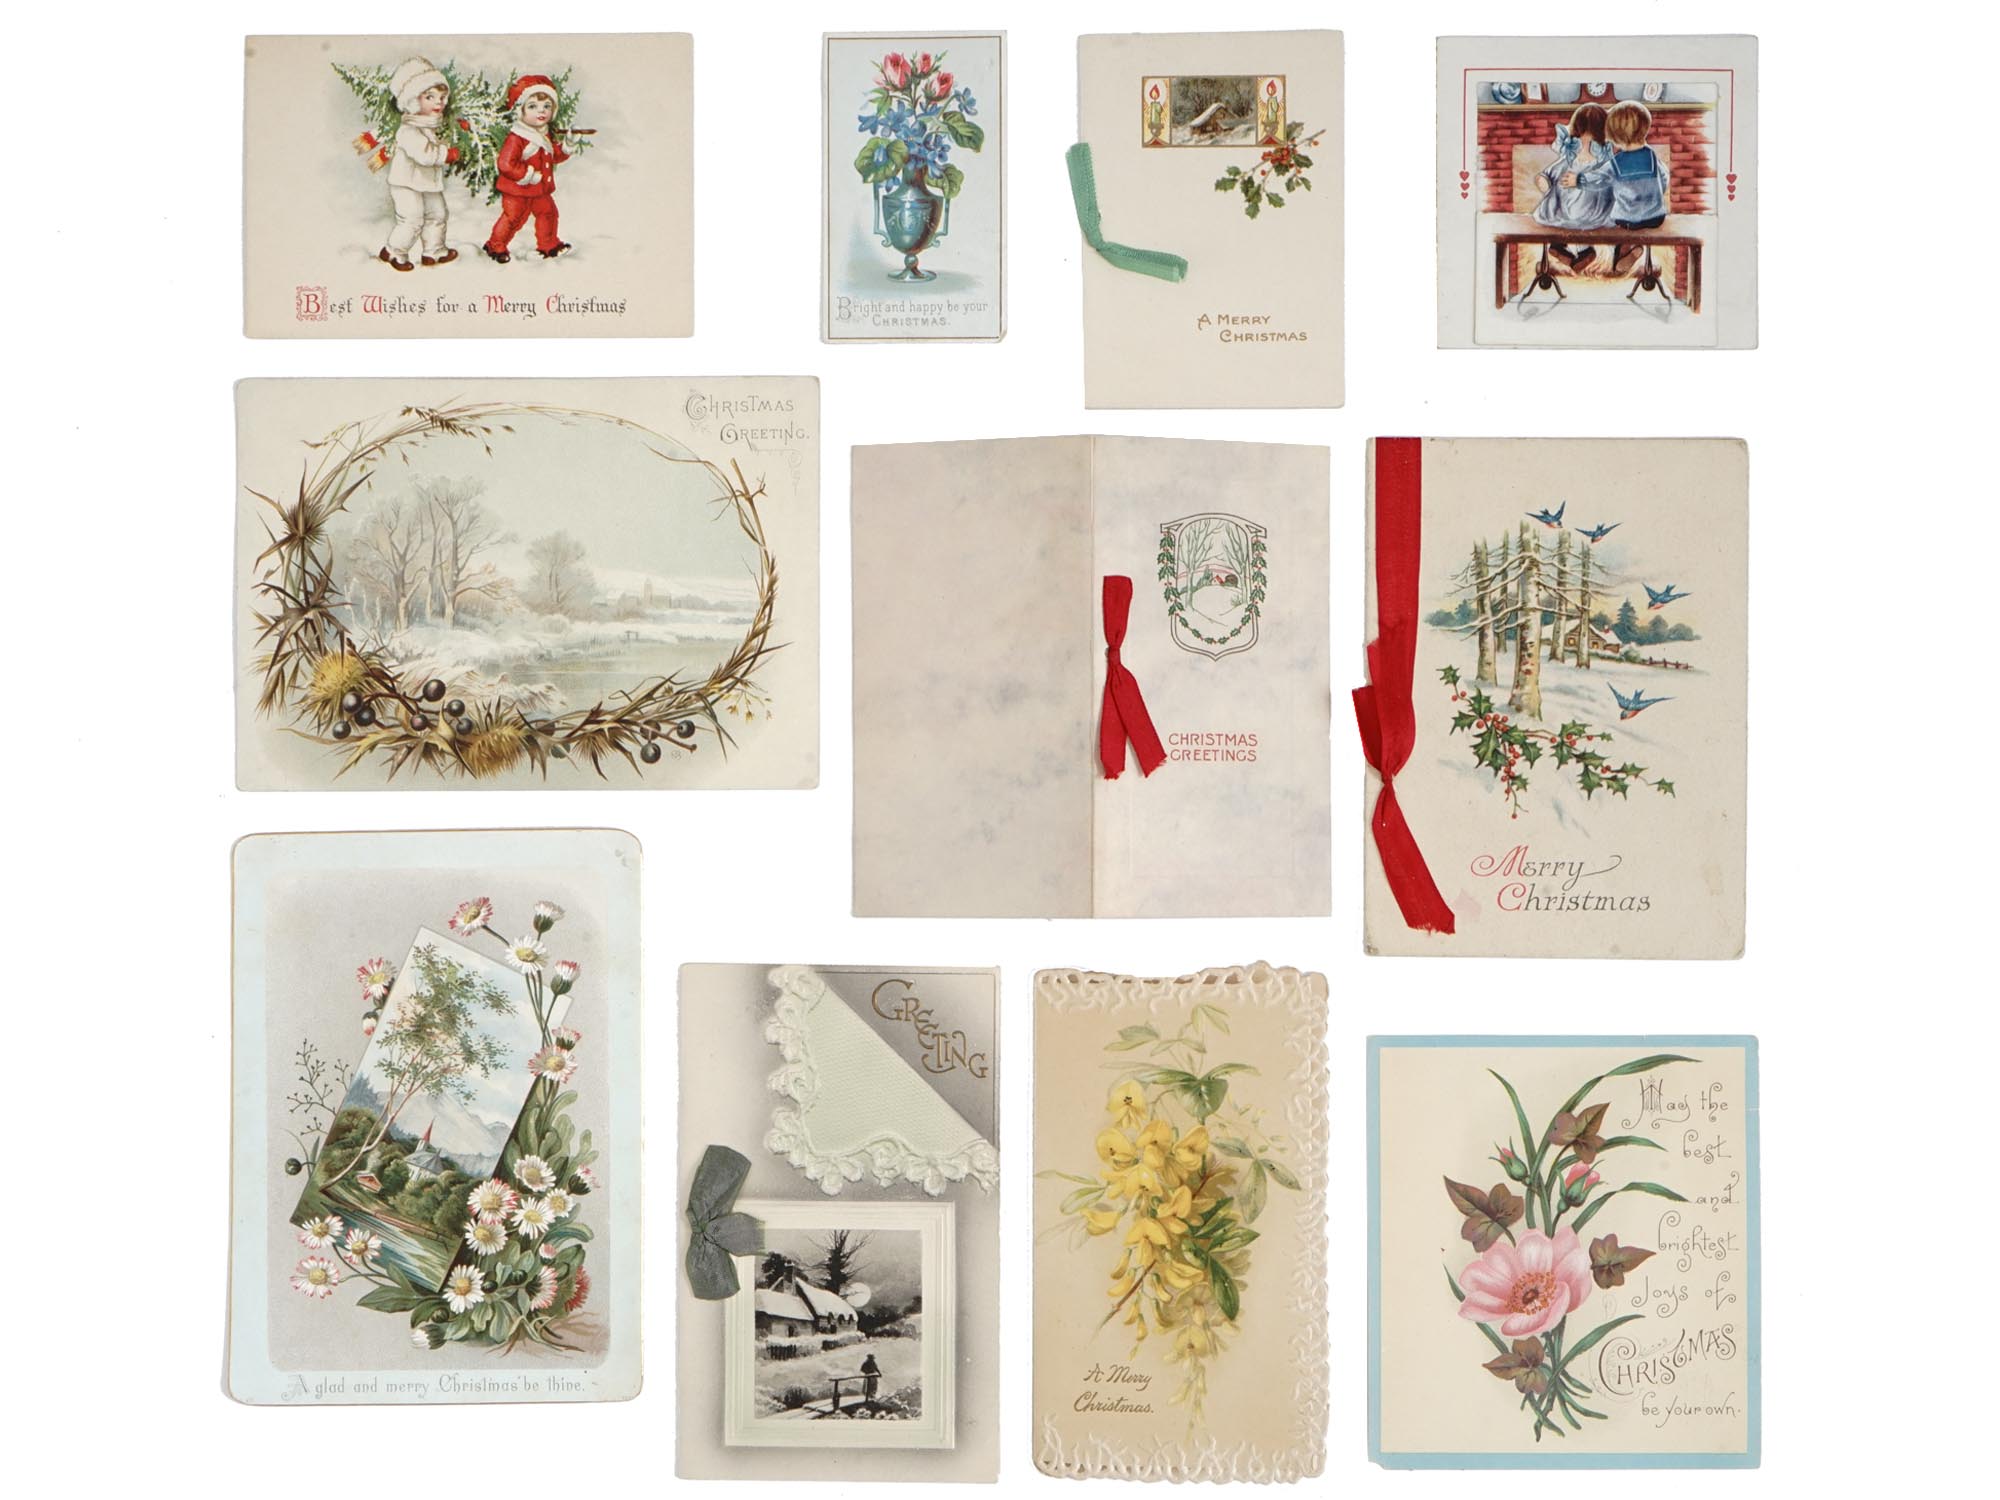 RARE ANTIQUE CHRISTMAS CARDS COLLECTION IN ALBUM PIC-4